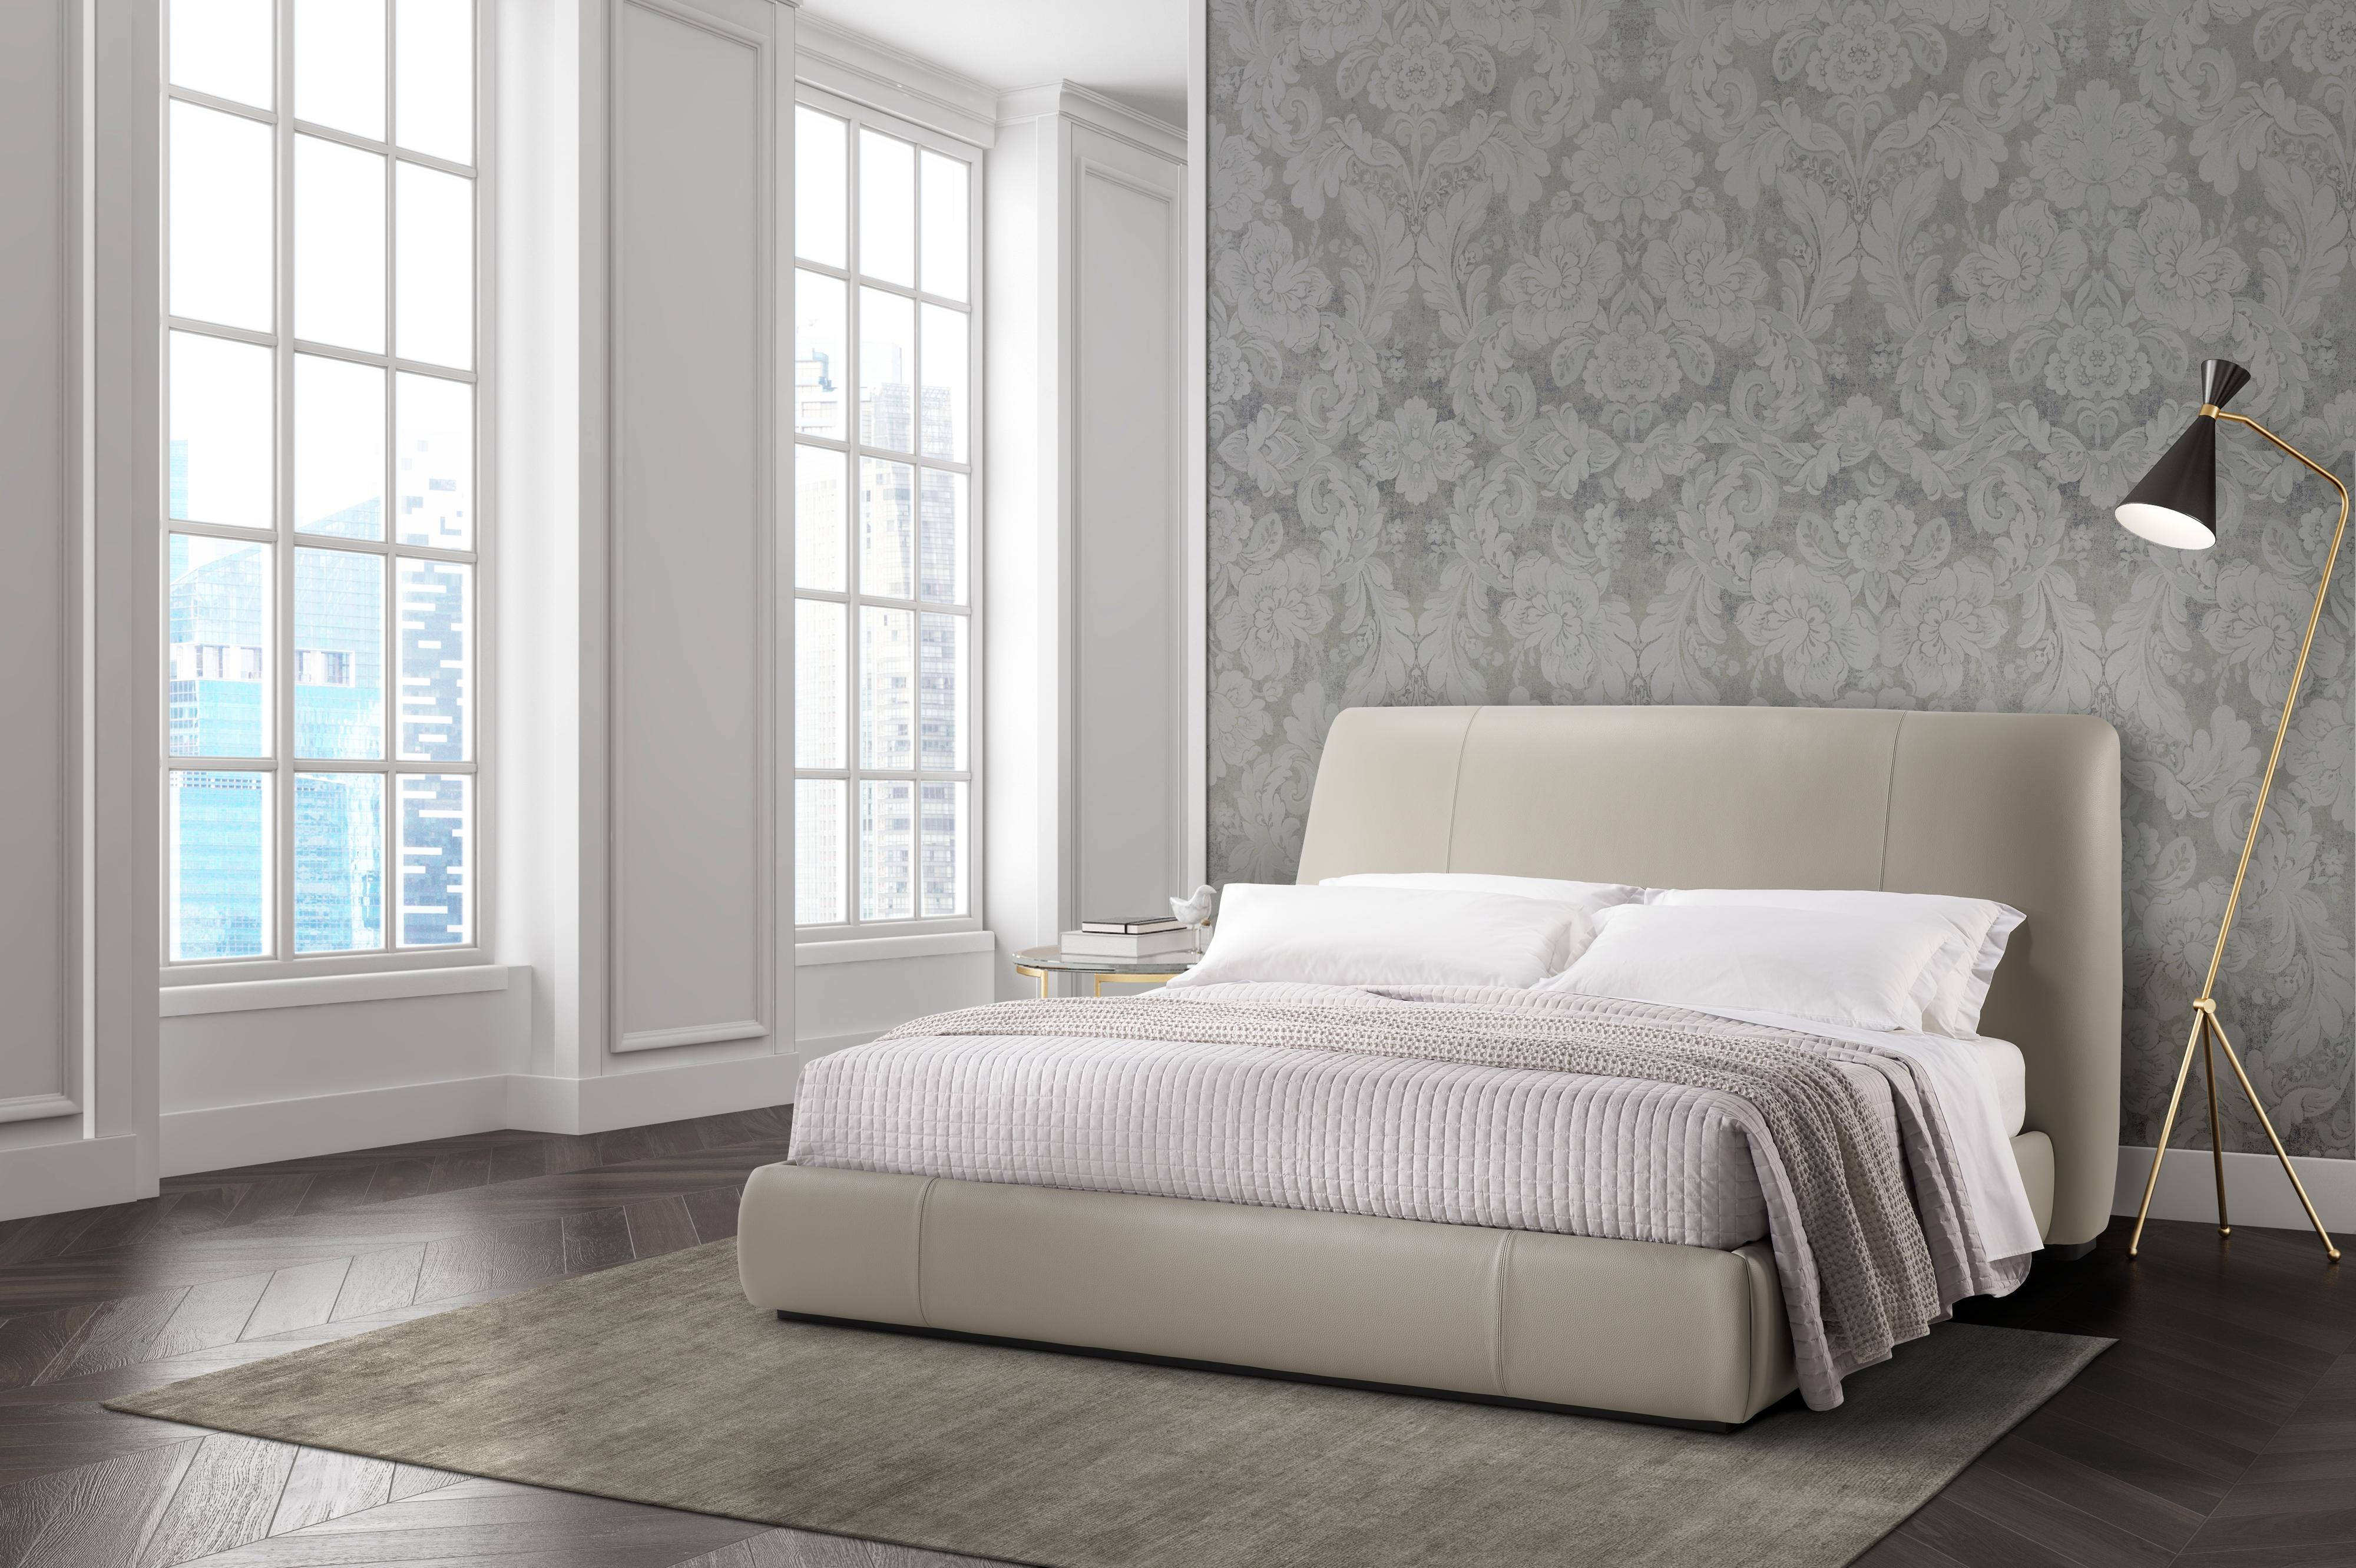 The Ancora bed has an abundant and generous shape, thanks to a headboard and sommier enriched with soft upholstery. Designer Ricardo Antonio's idea was to make a bed that, in the fullness of its curved lines, makes us feel welcomed, cuddled in an